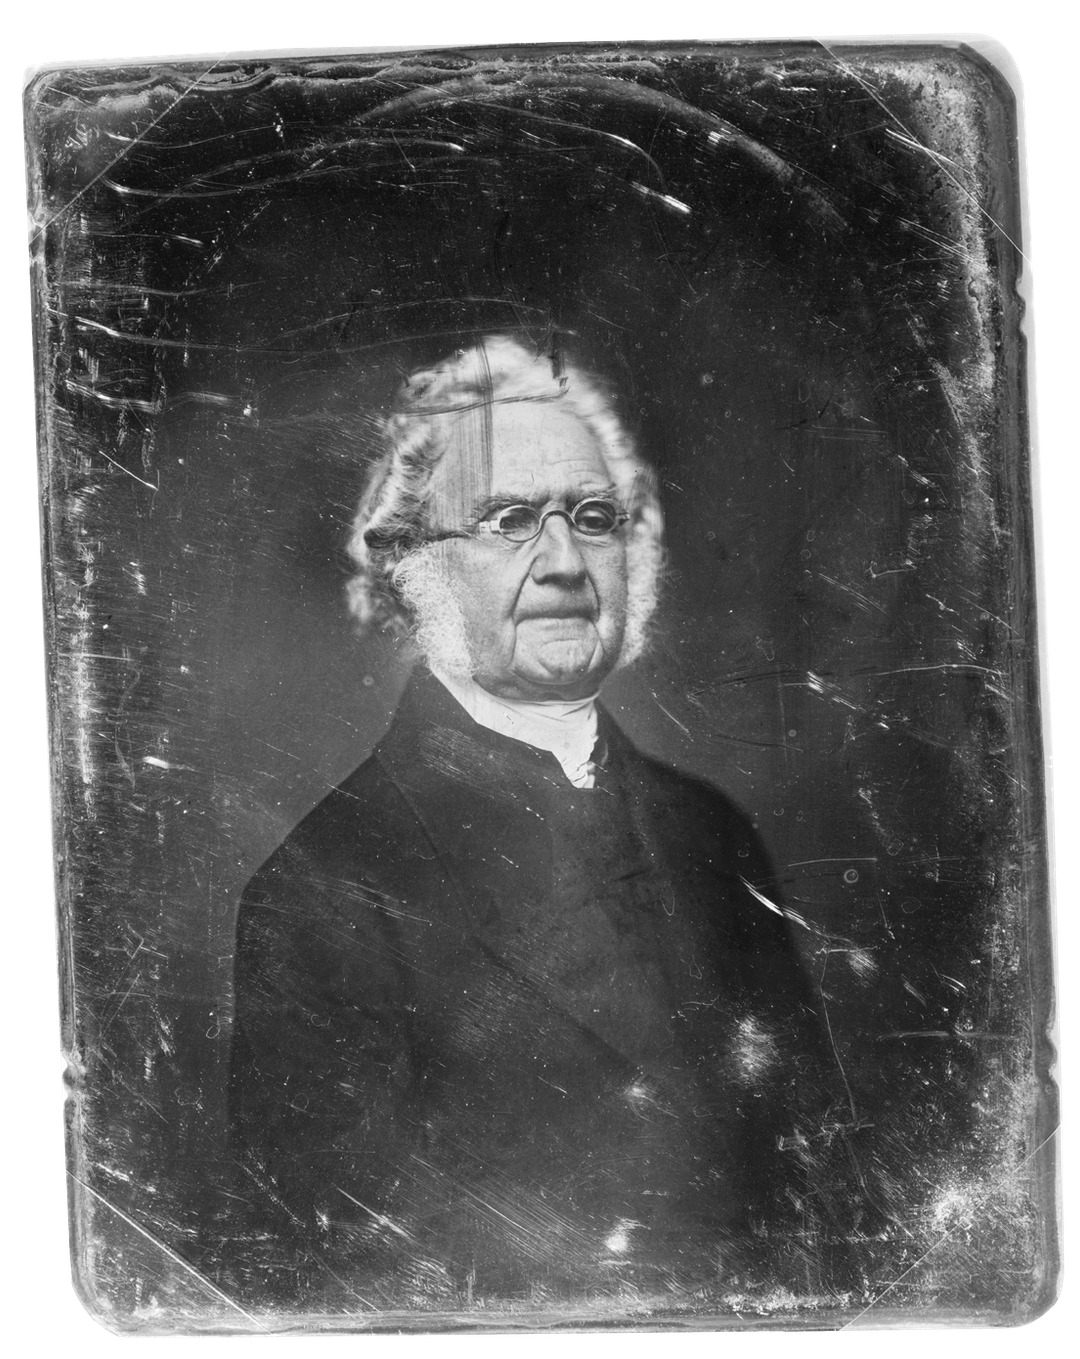 Sampson Simson, between 1844 and 1860